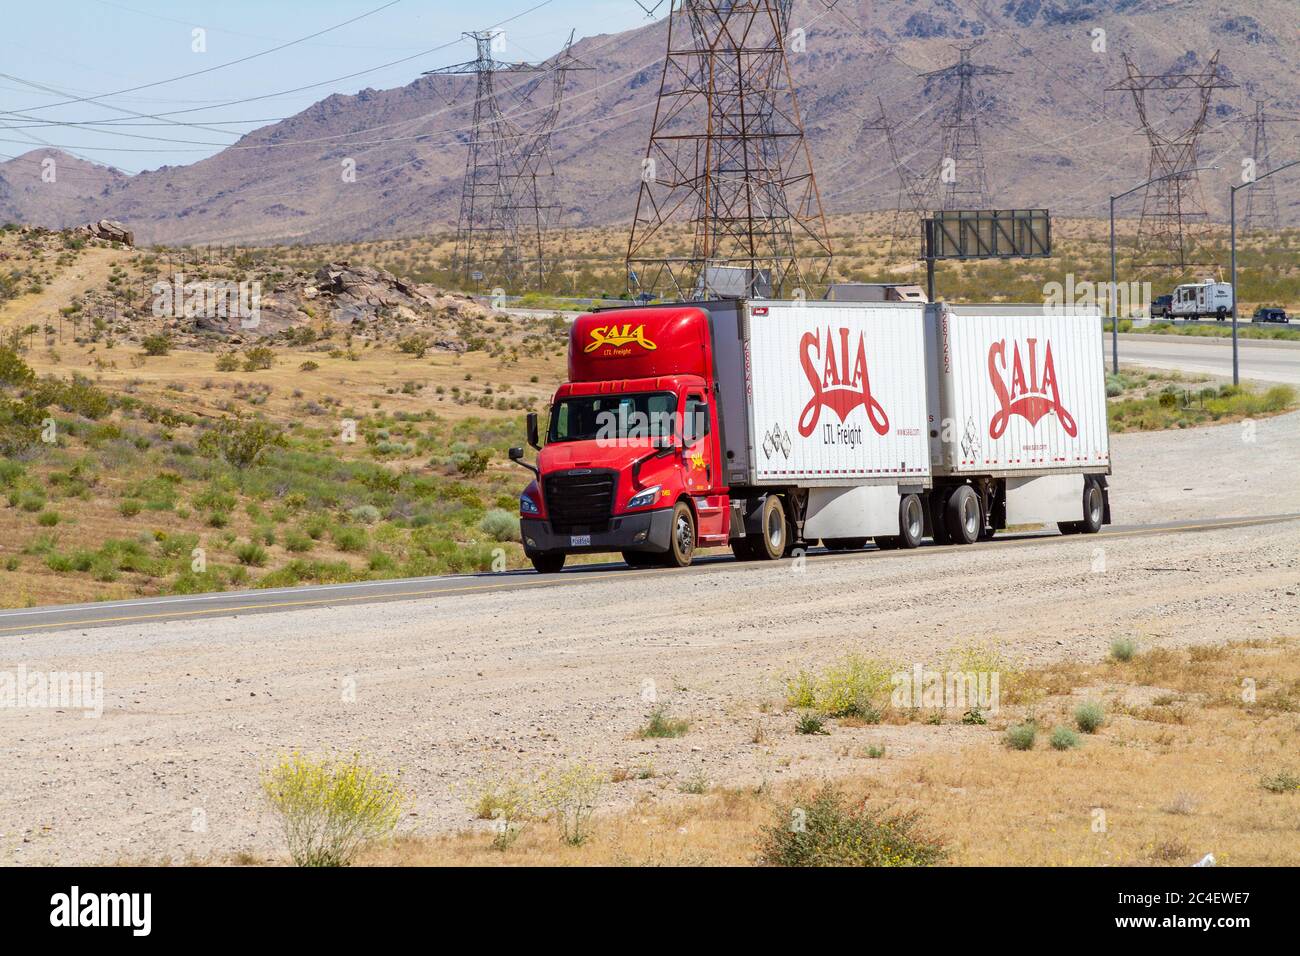 Apple Valley, CA / USA – May 16, 2020: A red and white Sala Freight semi-truck on a offramp of Interstate 15 in the Mojave Desert near the Town of App Stock Photo